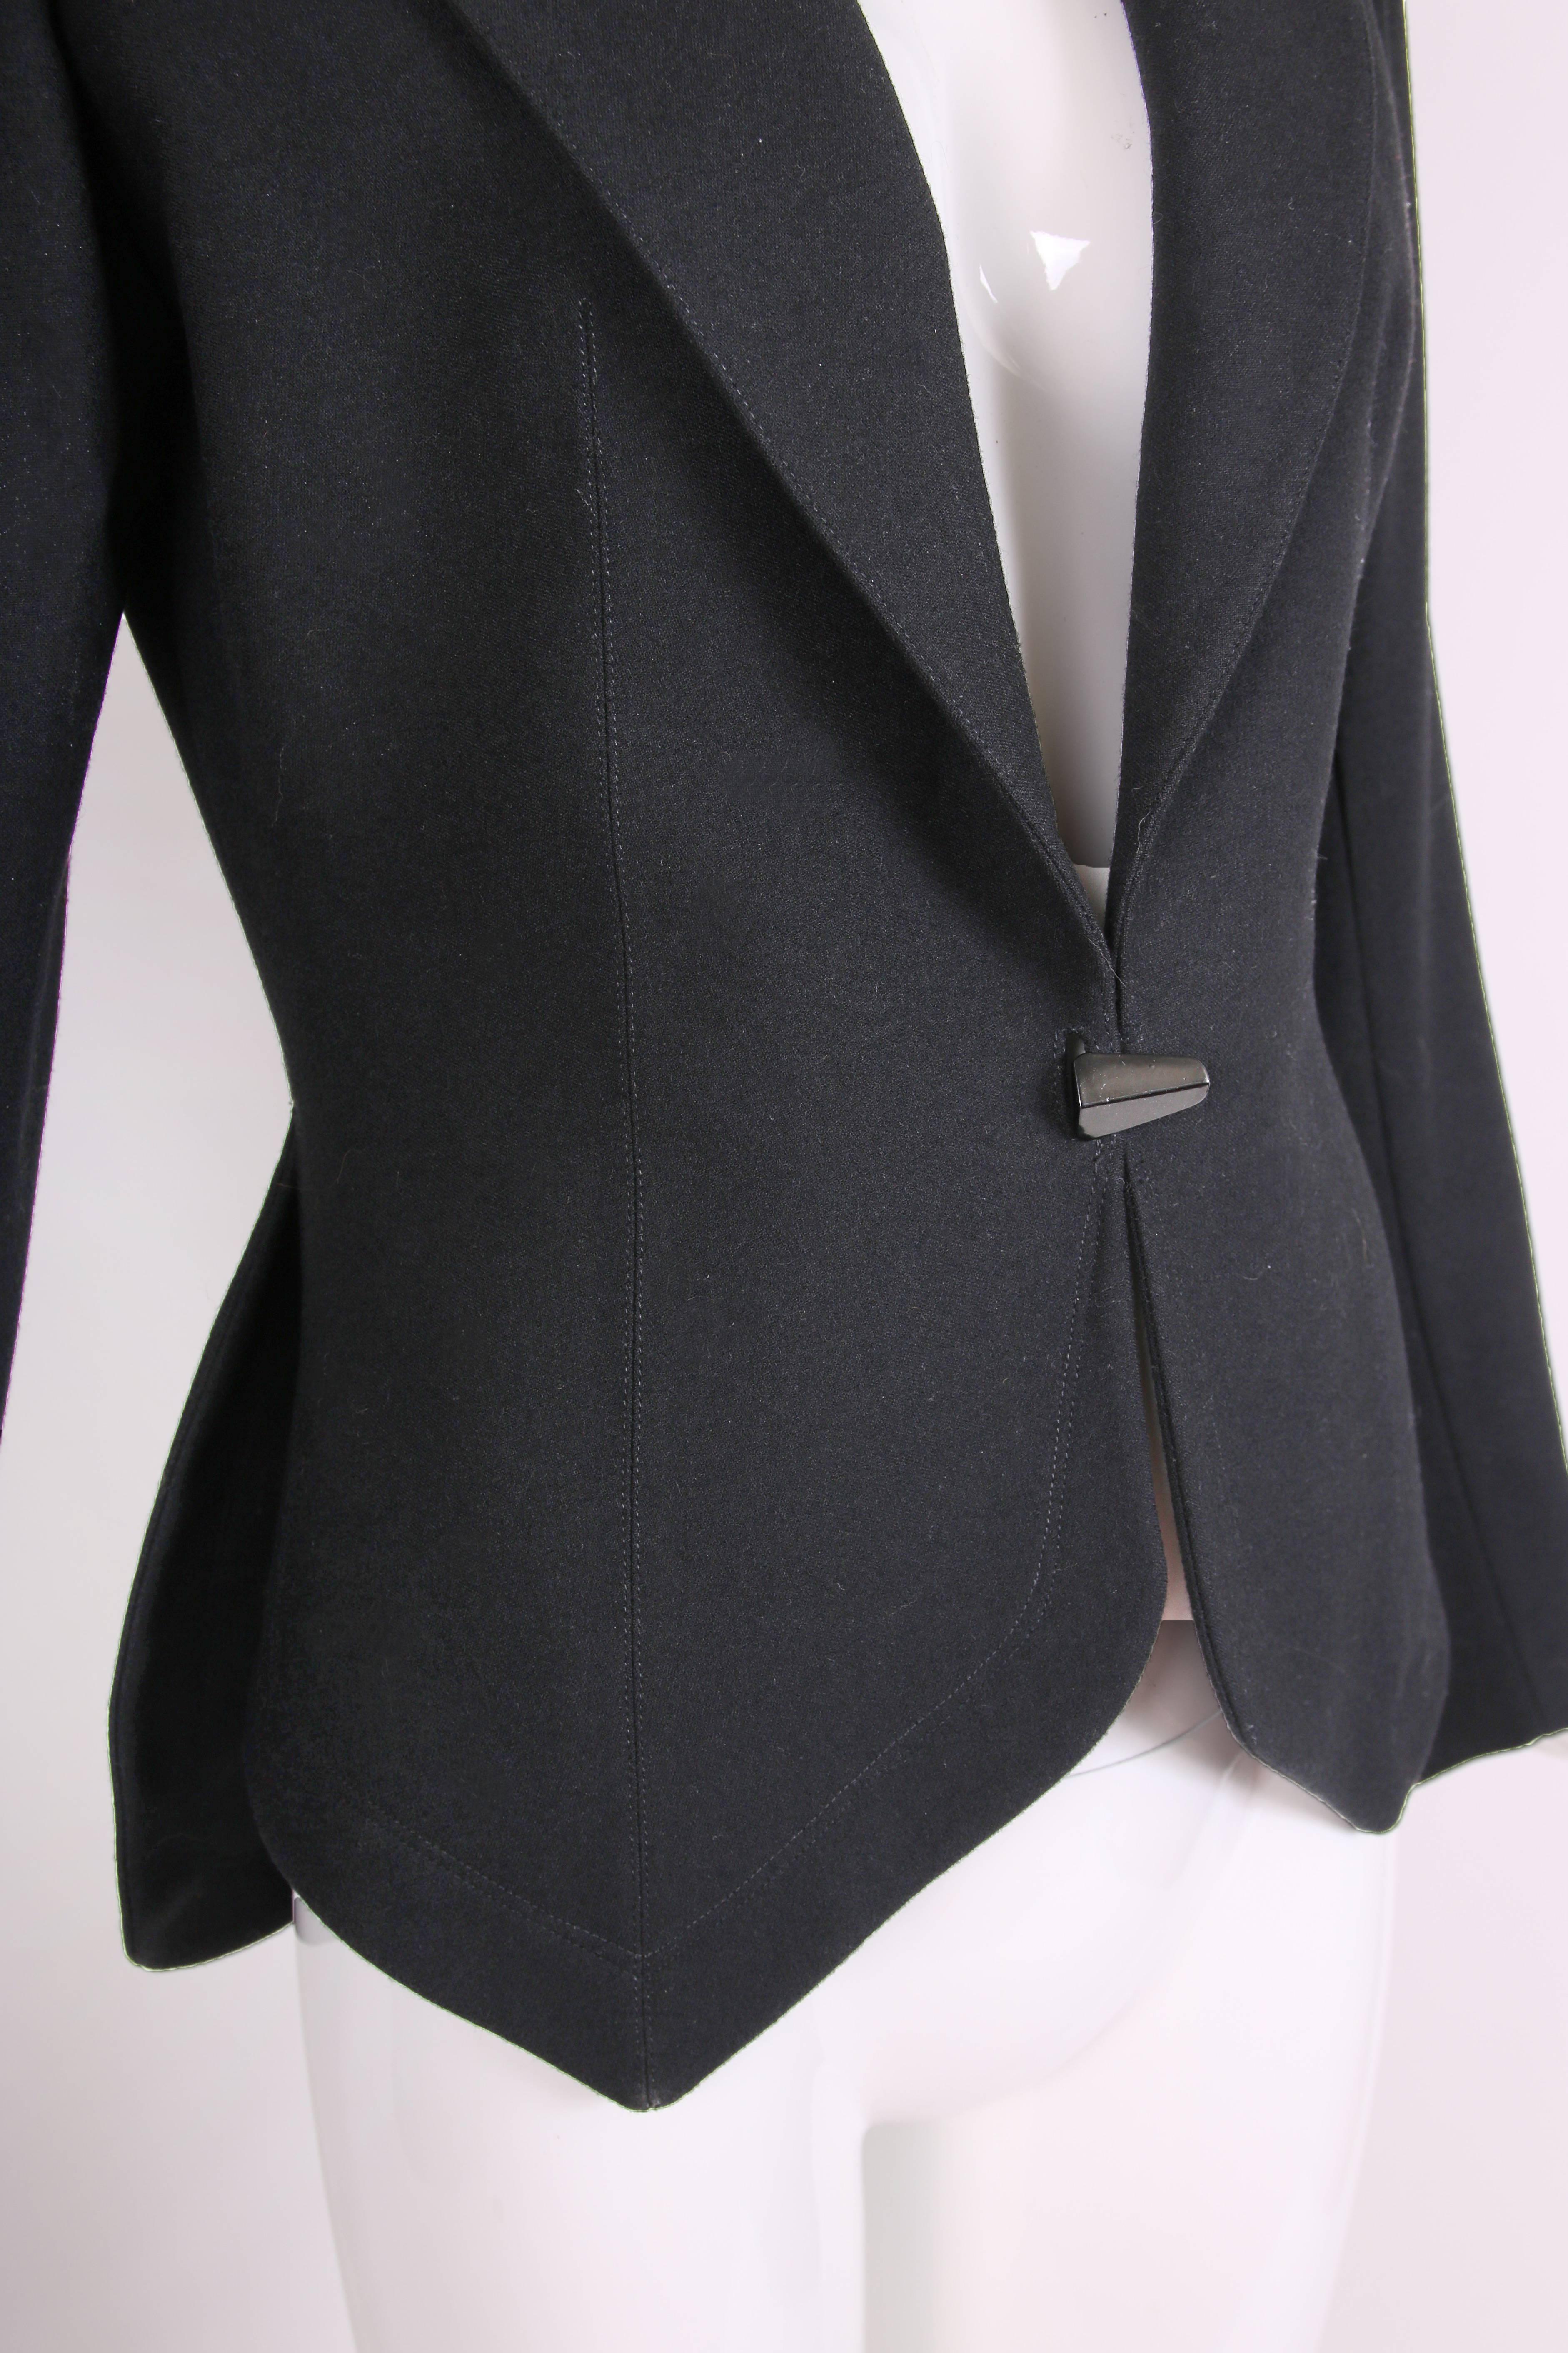 1991 Azzedine Alaia Black Wool Fitted Jacket Blazer In Excellent Condition In Studio City, CA